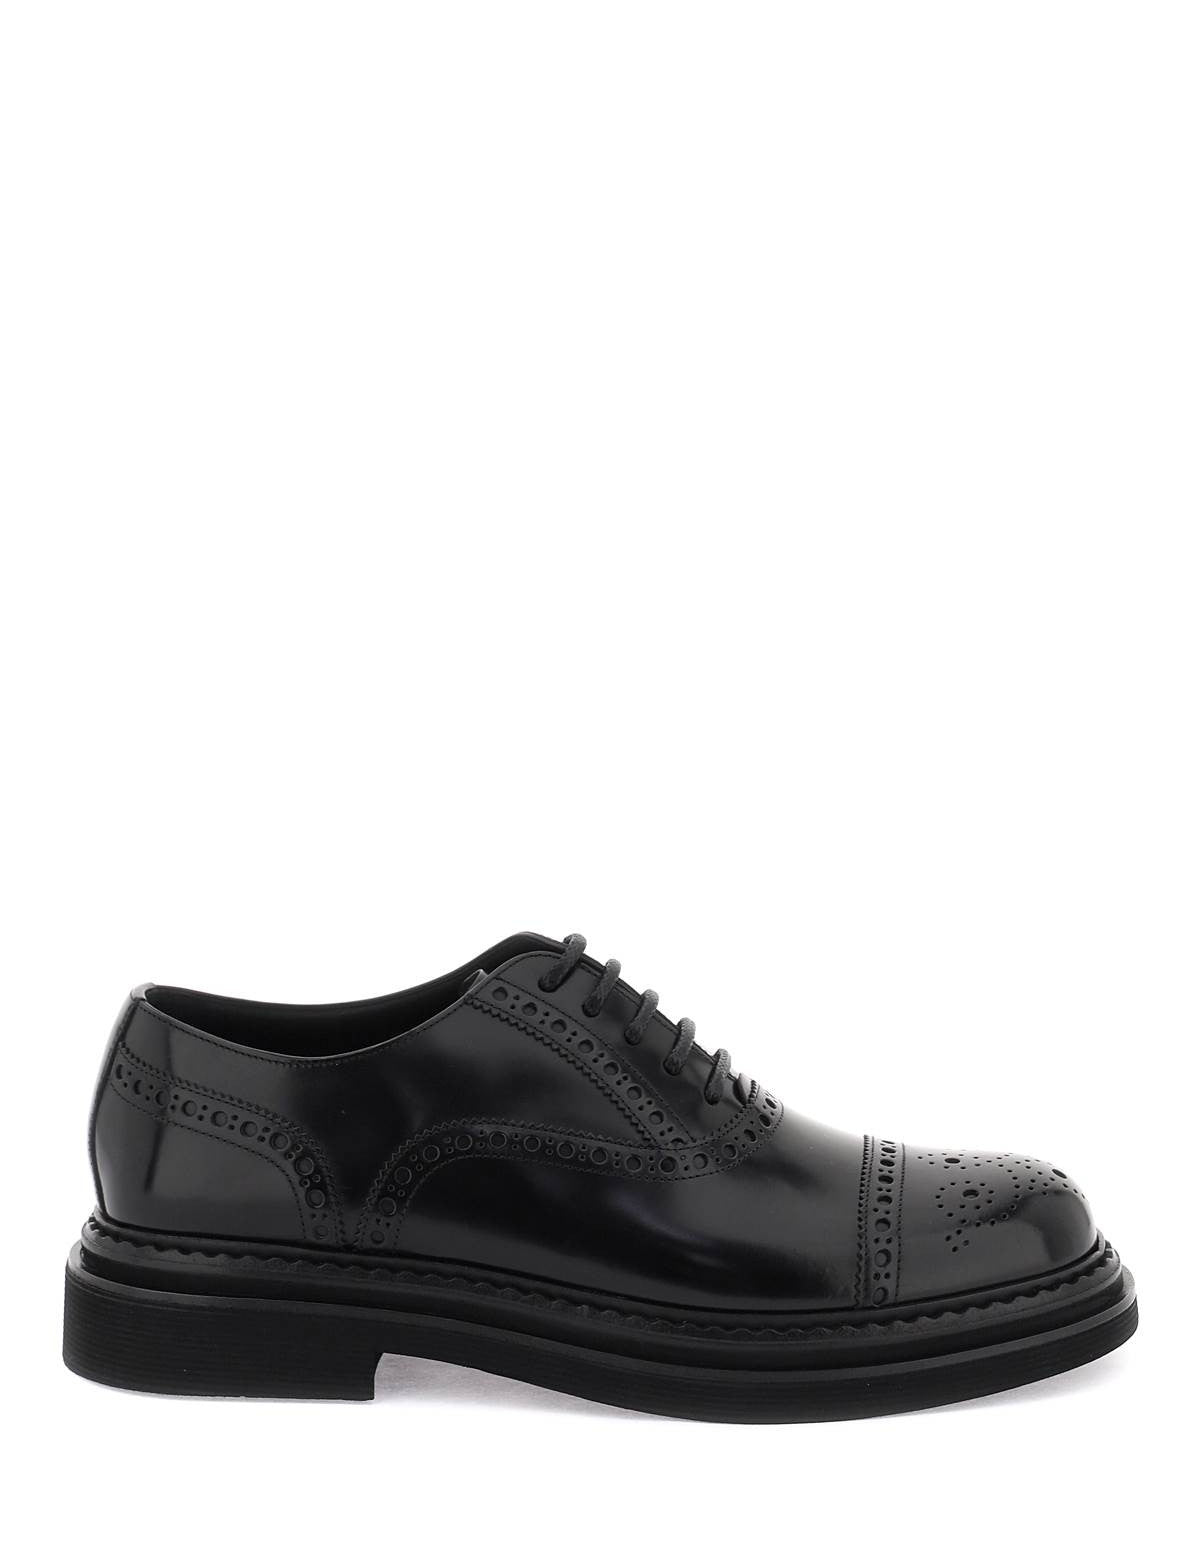 dolce-gabbana-brushed-leather-oxford-lace-ups.jpg